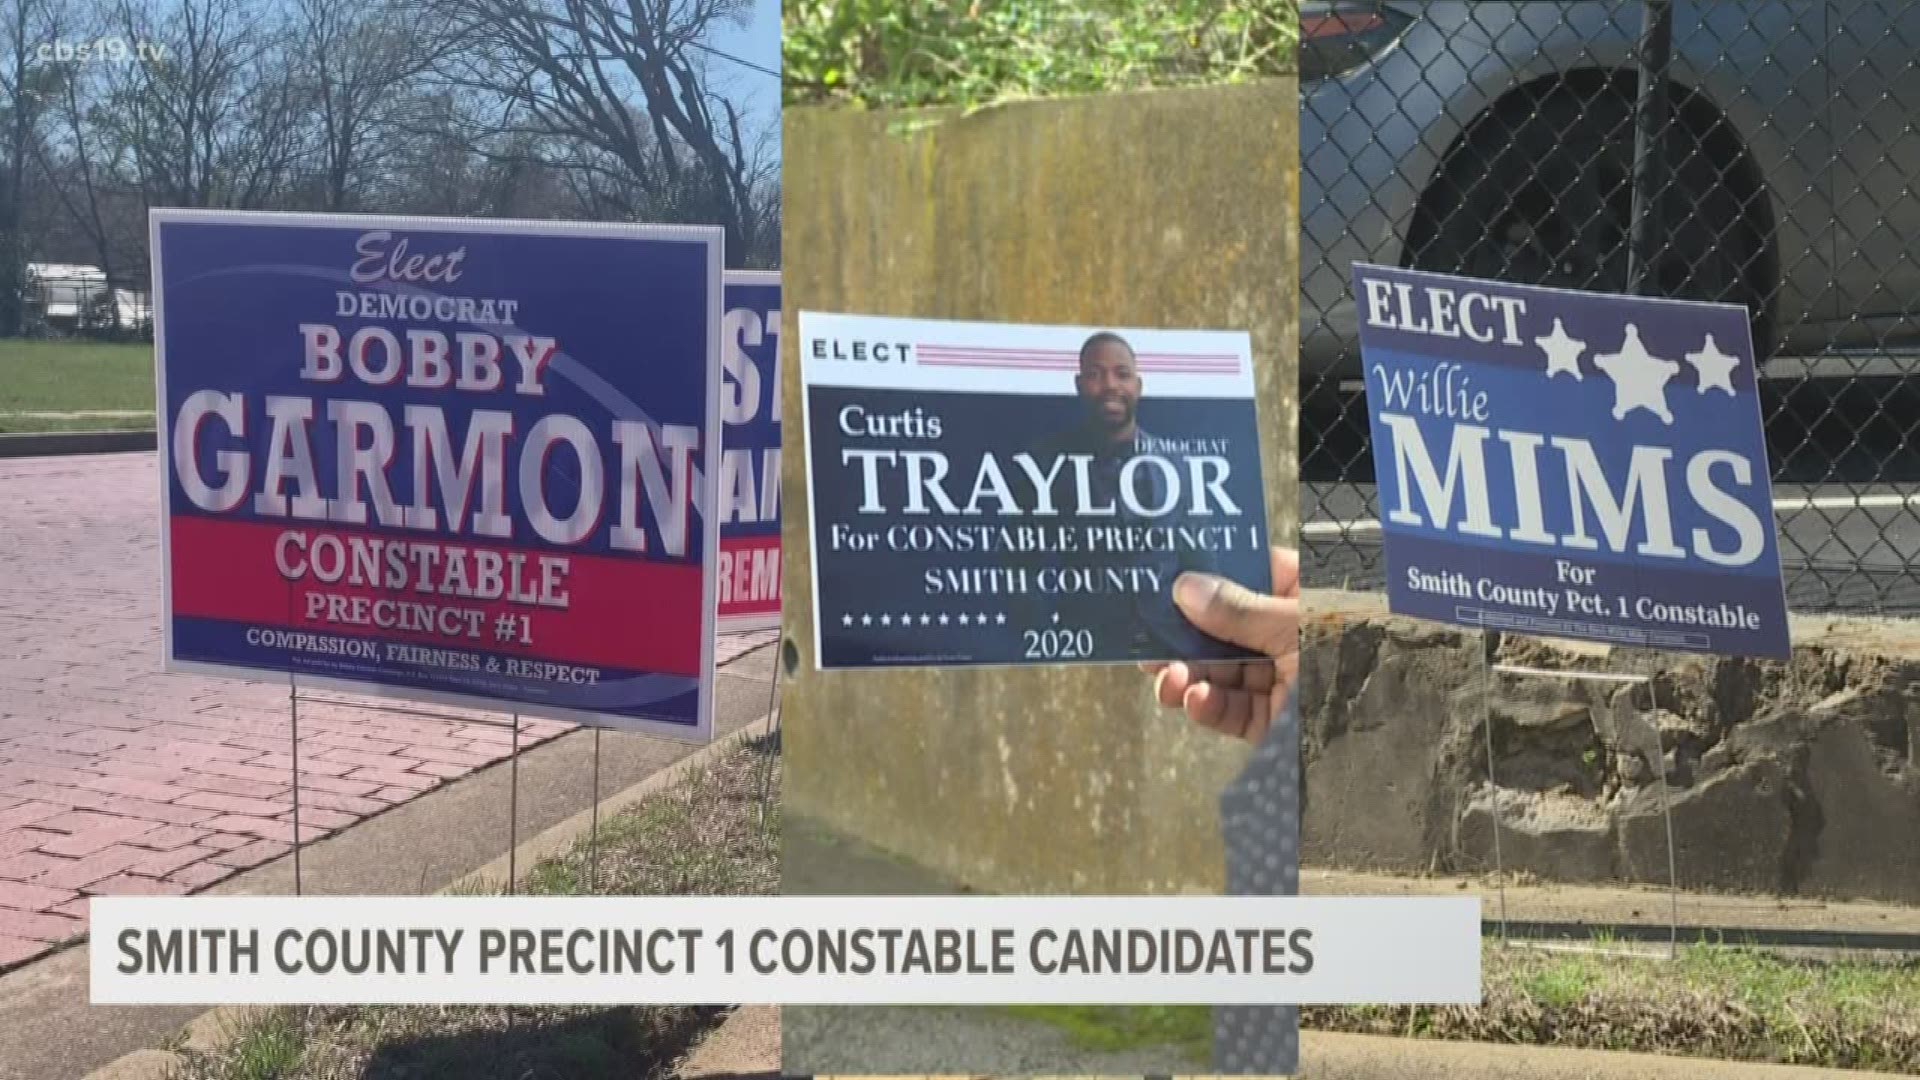 There’s been controversy surrounding the race for Smith County Precinct 1 Constable candidates, but who are the men running for the office?